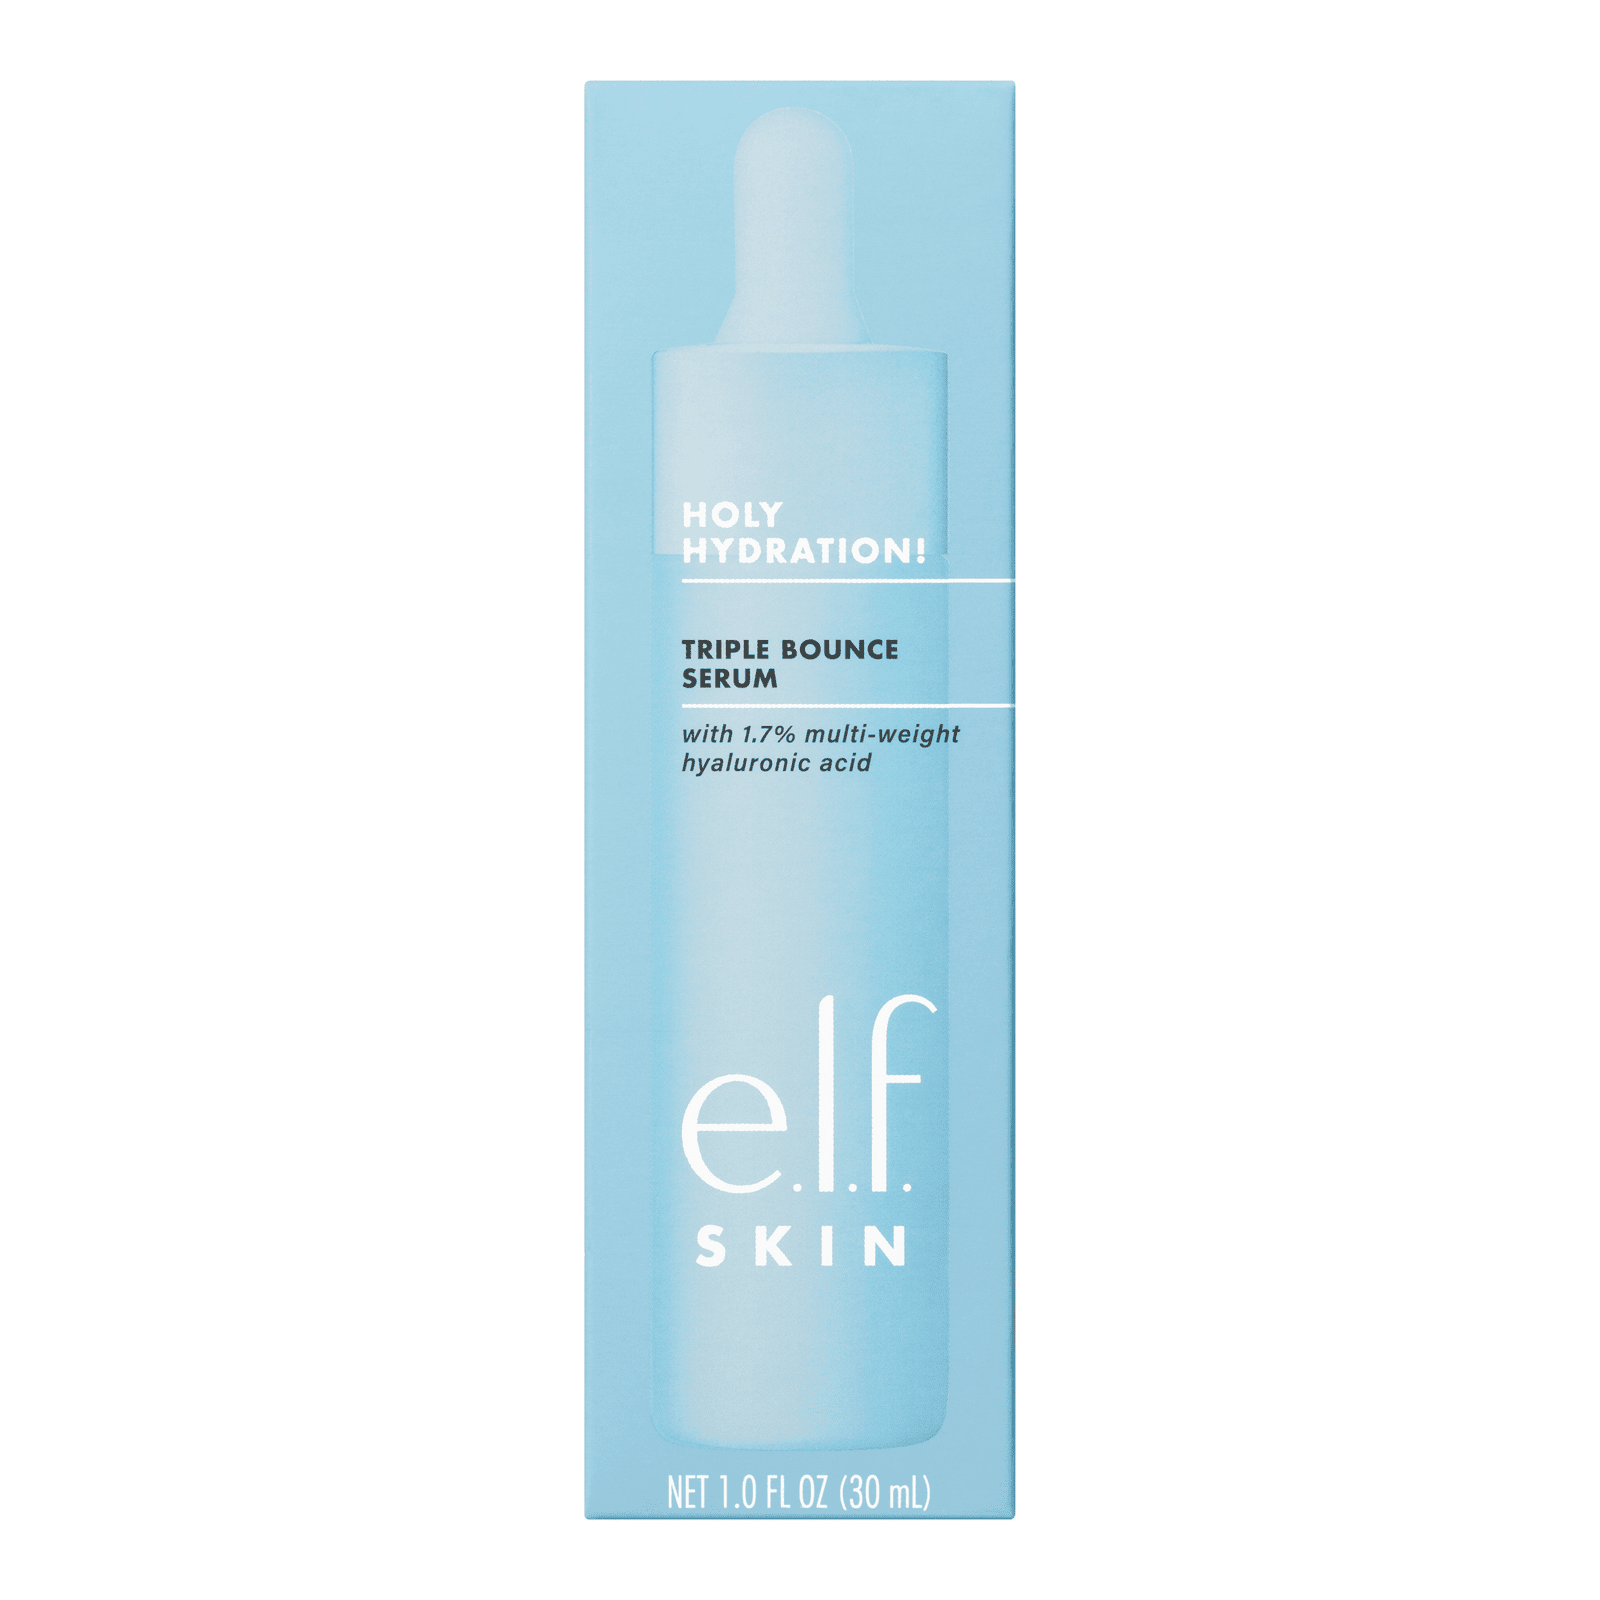 E.l.f Holy Hydration! Triple Bounce Serum 2 Shaws Department Stores